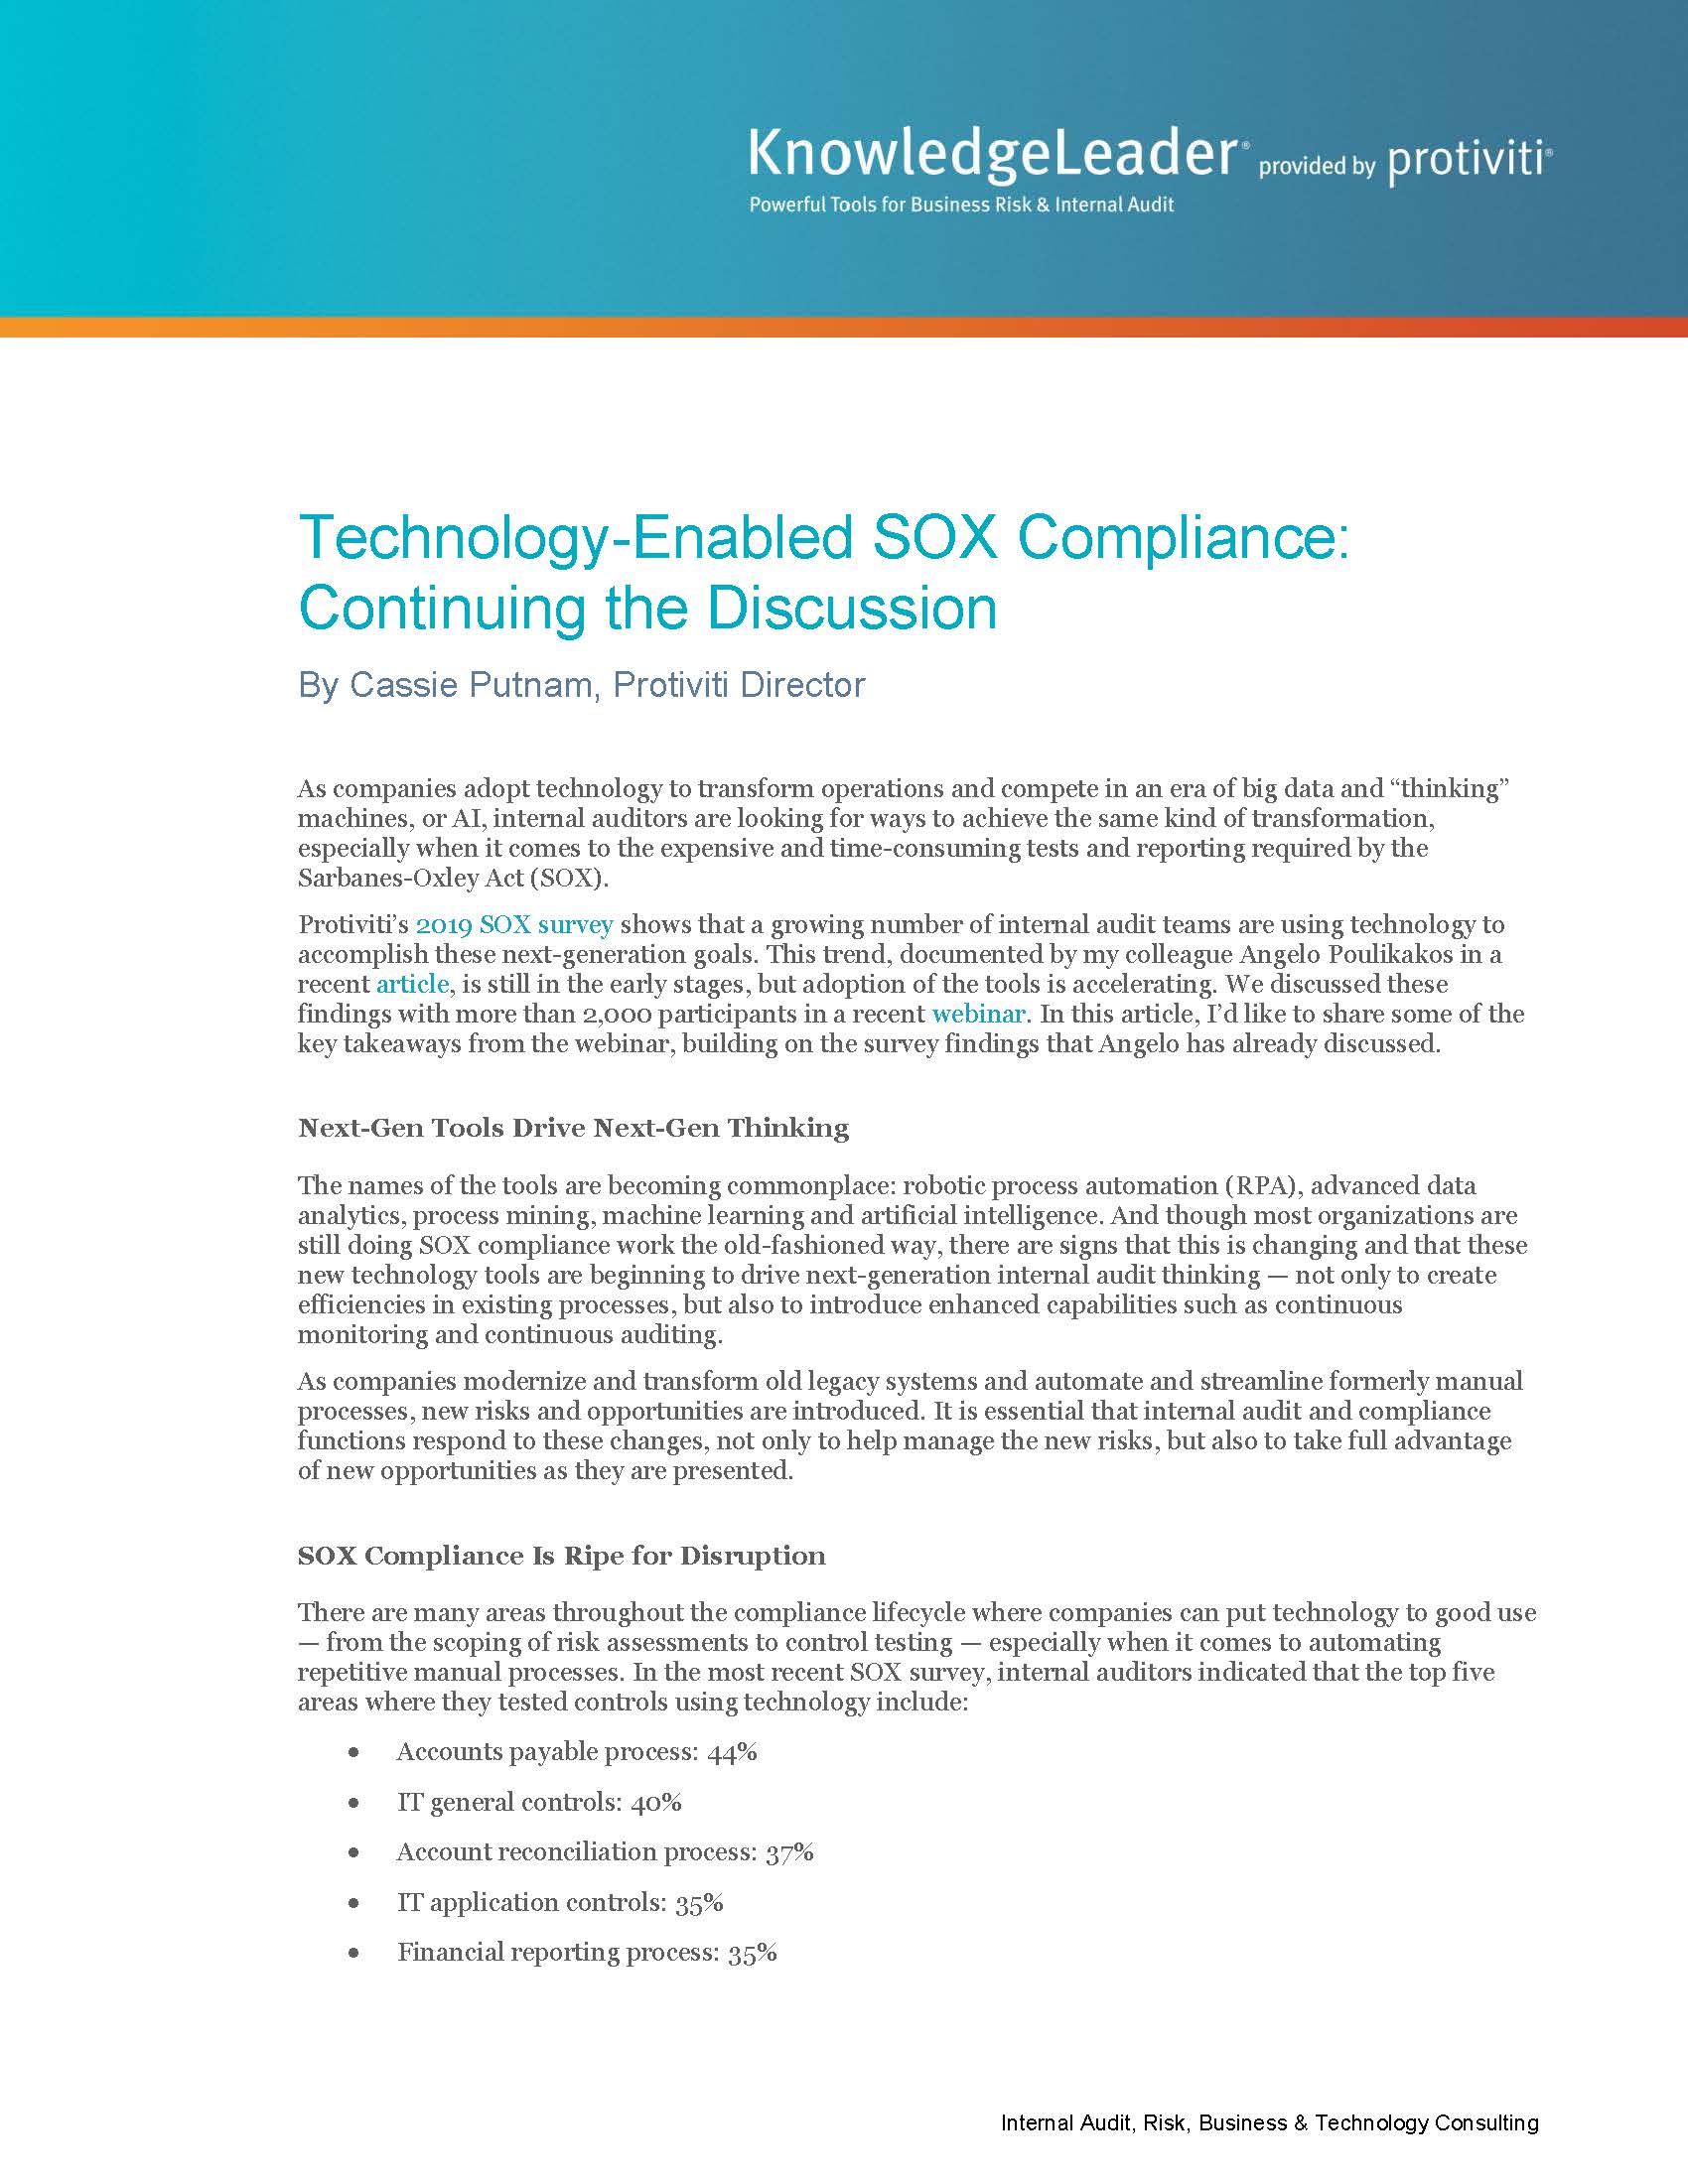 Screenshot of the first page of Technology-Enabled SOX Compliance Continuing the Discussion